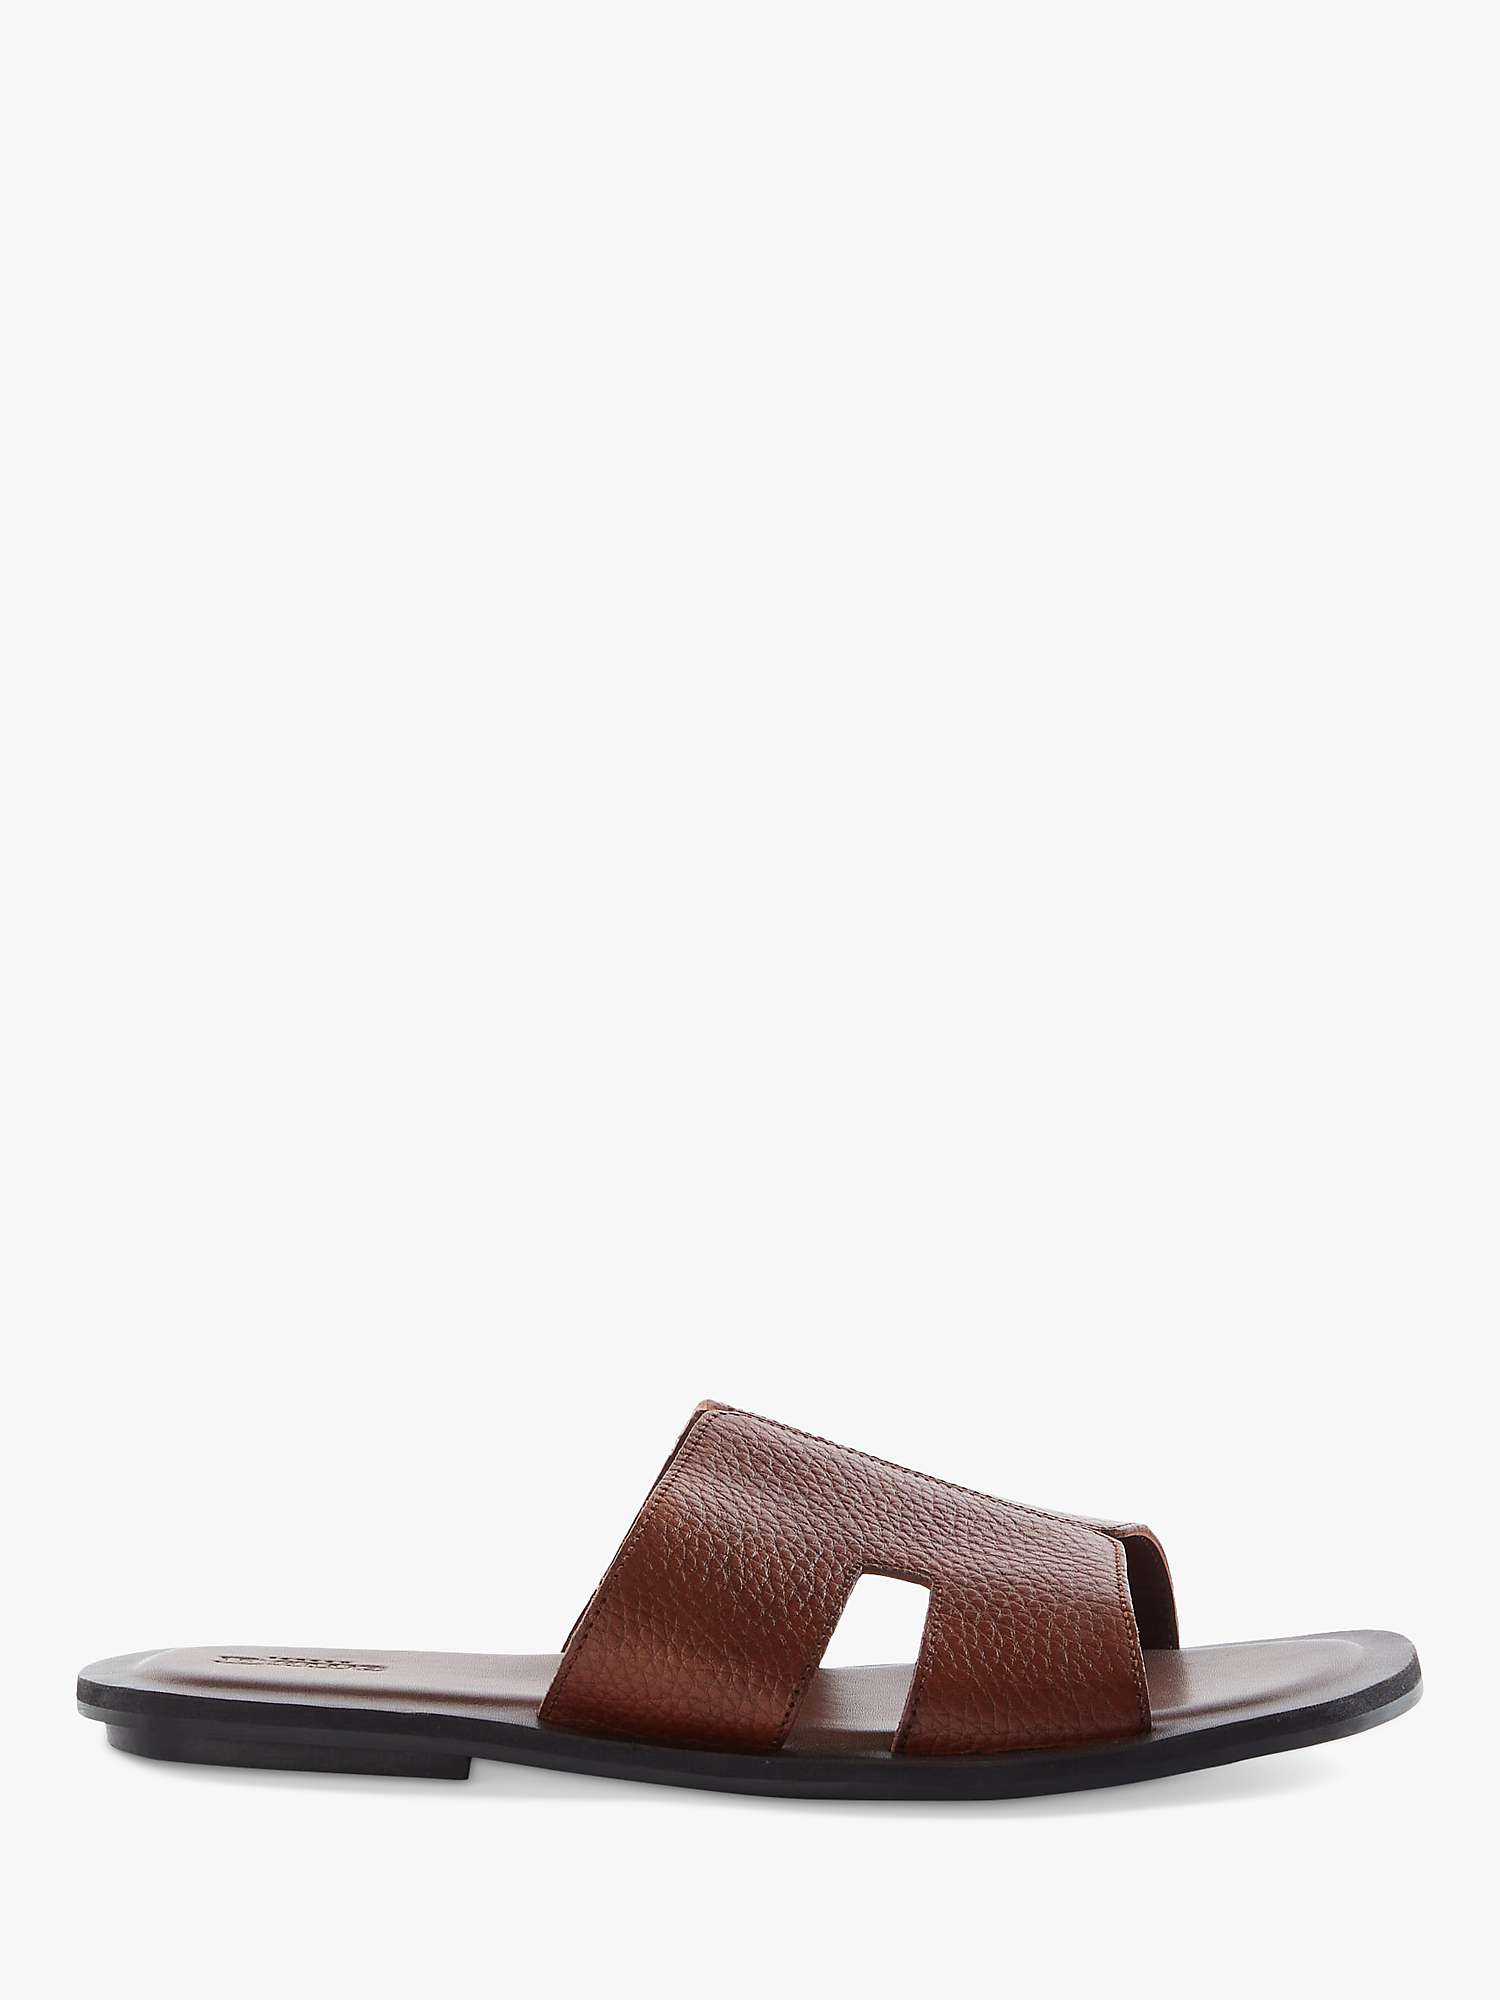 Buy Dune Initially Leather Flat Sandals Online at johnlewis.com